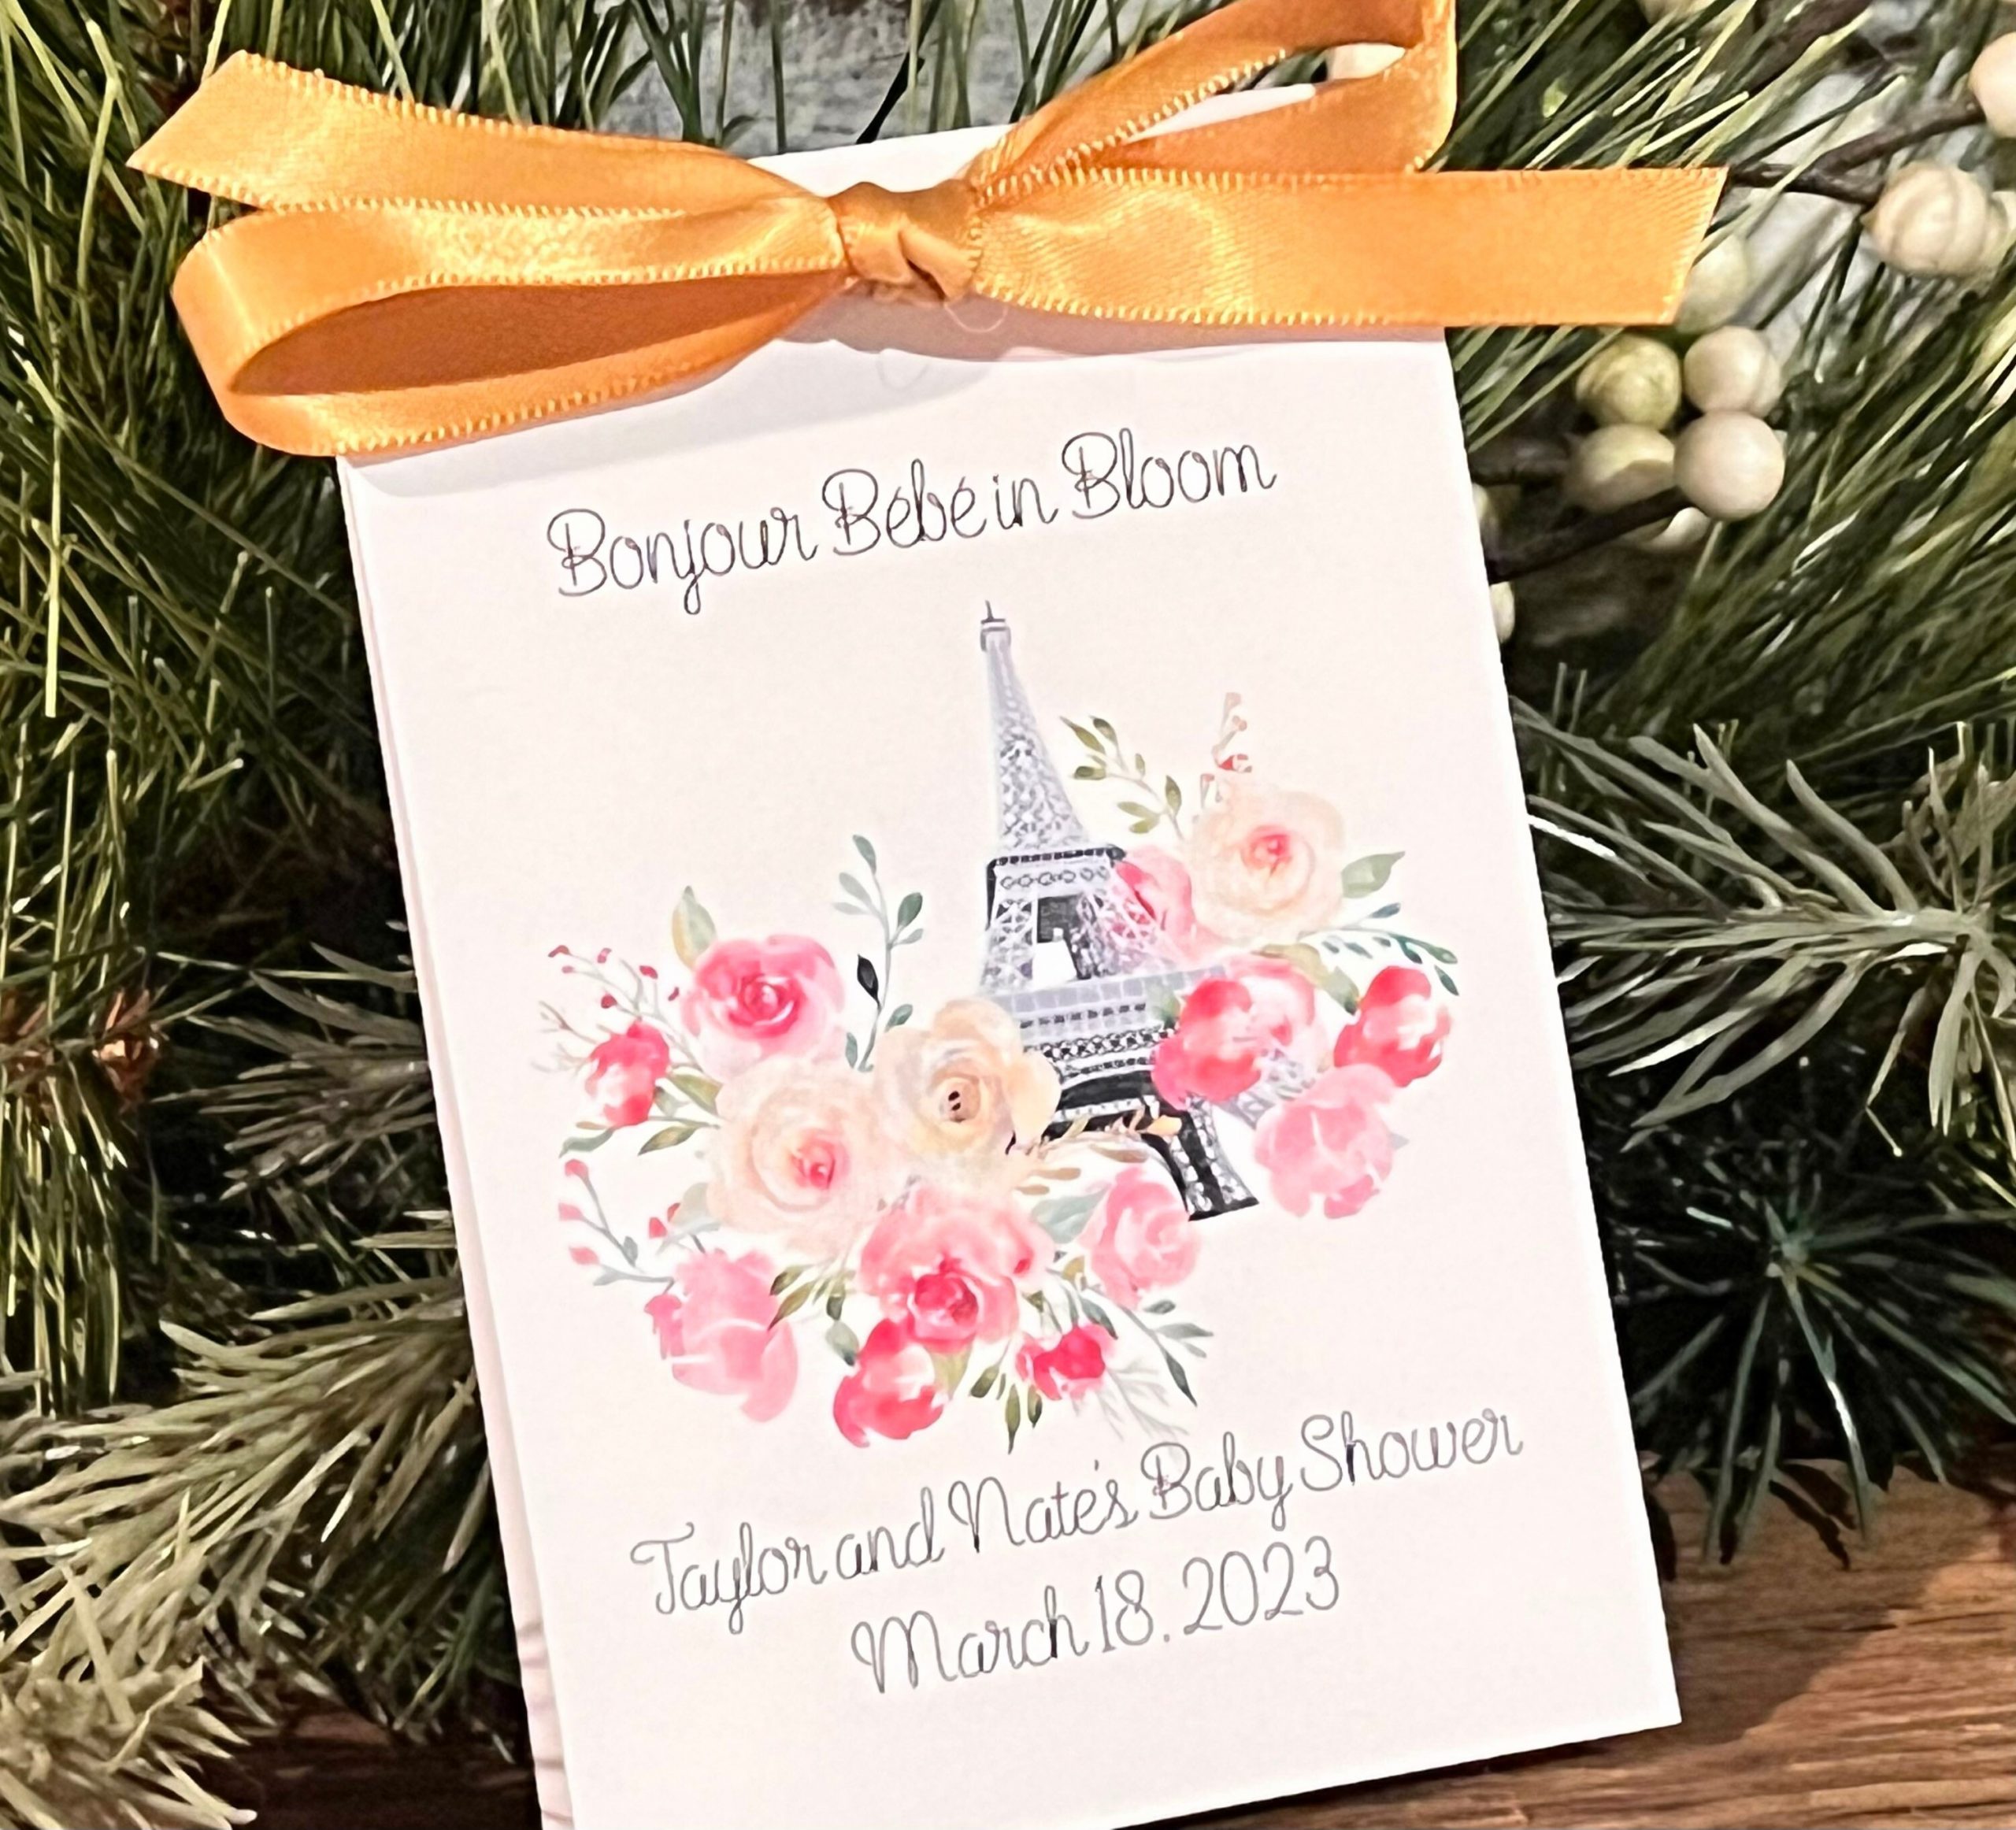 Baby Shower Favors Gifts Seed Packets Baby in Bloom Floral